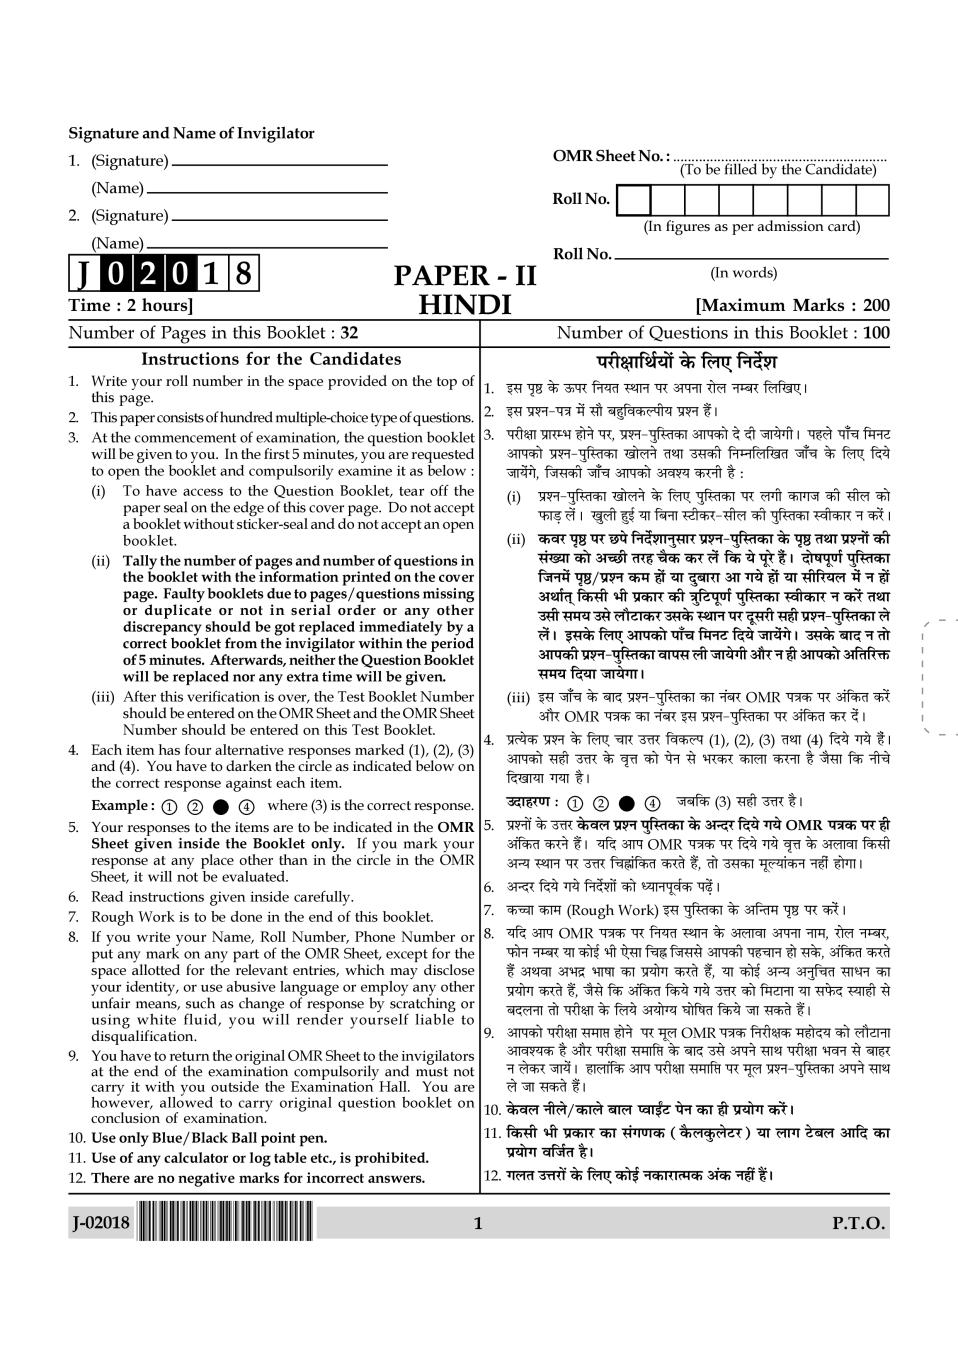 UGC NET Hindi Question Paper 2018 - Page 1